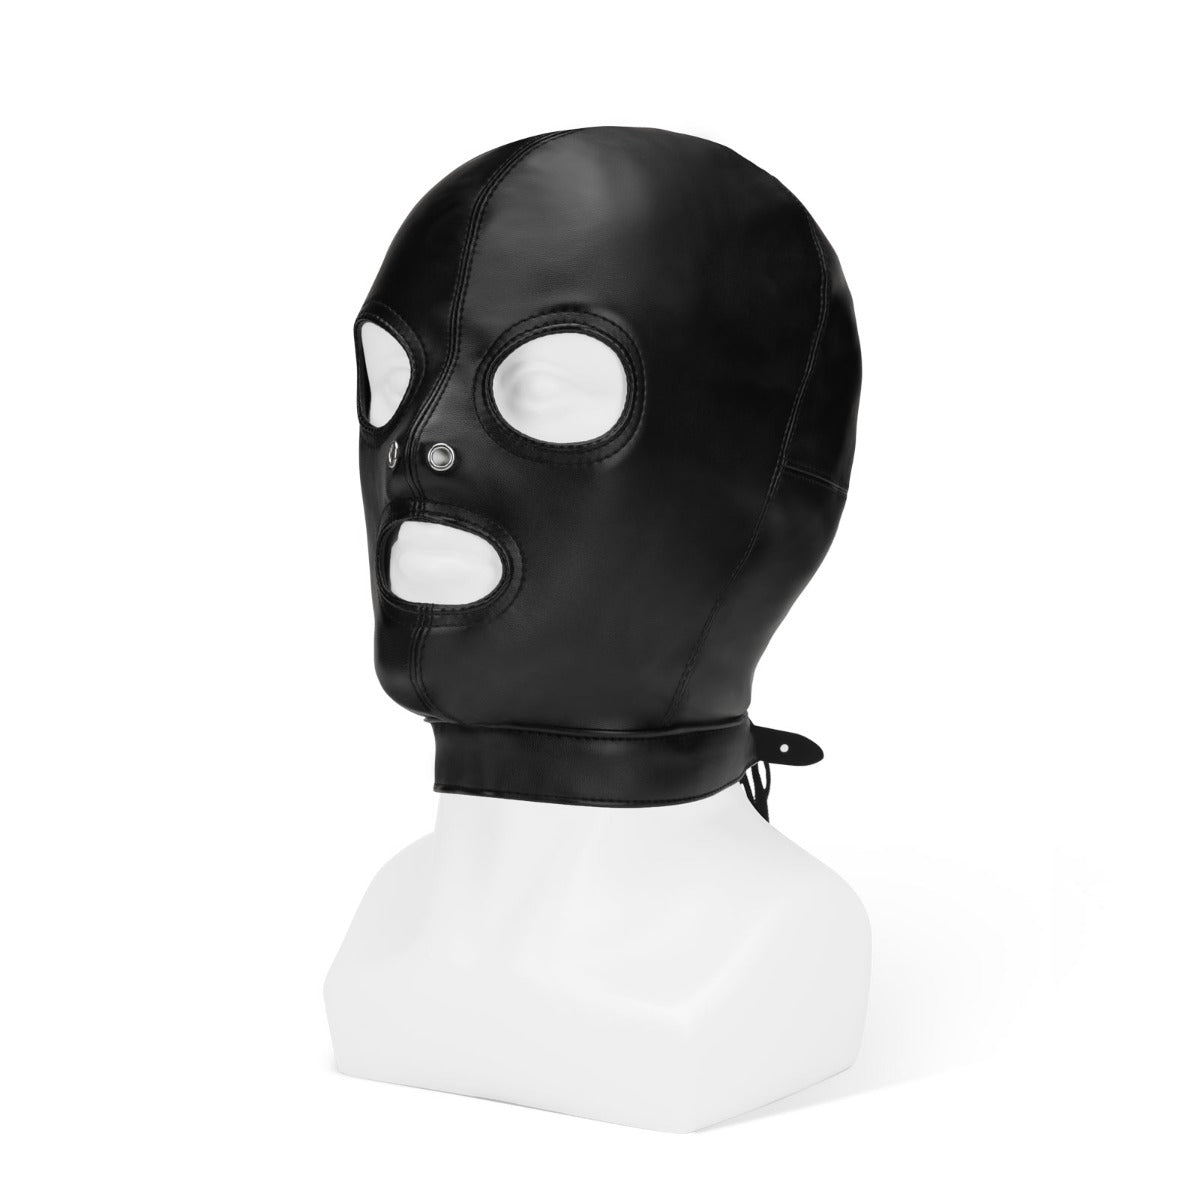 Fetish Wear - hoods Me You Us Black Hood with Eyes Nose Mouth   